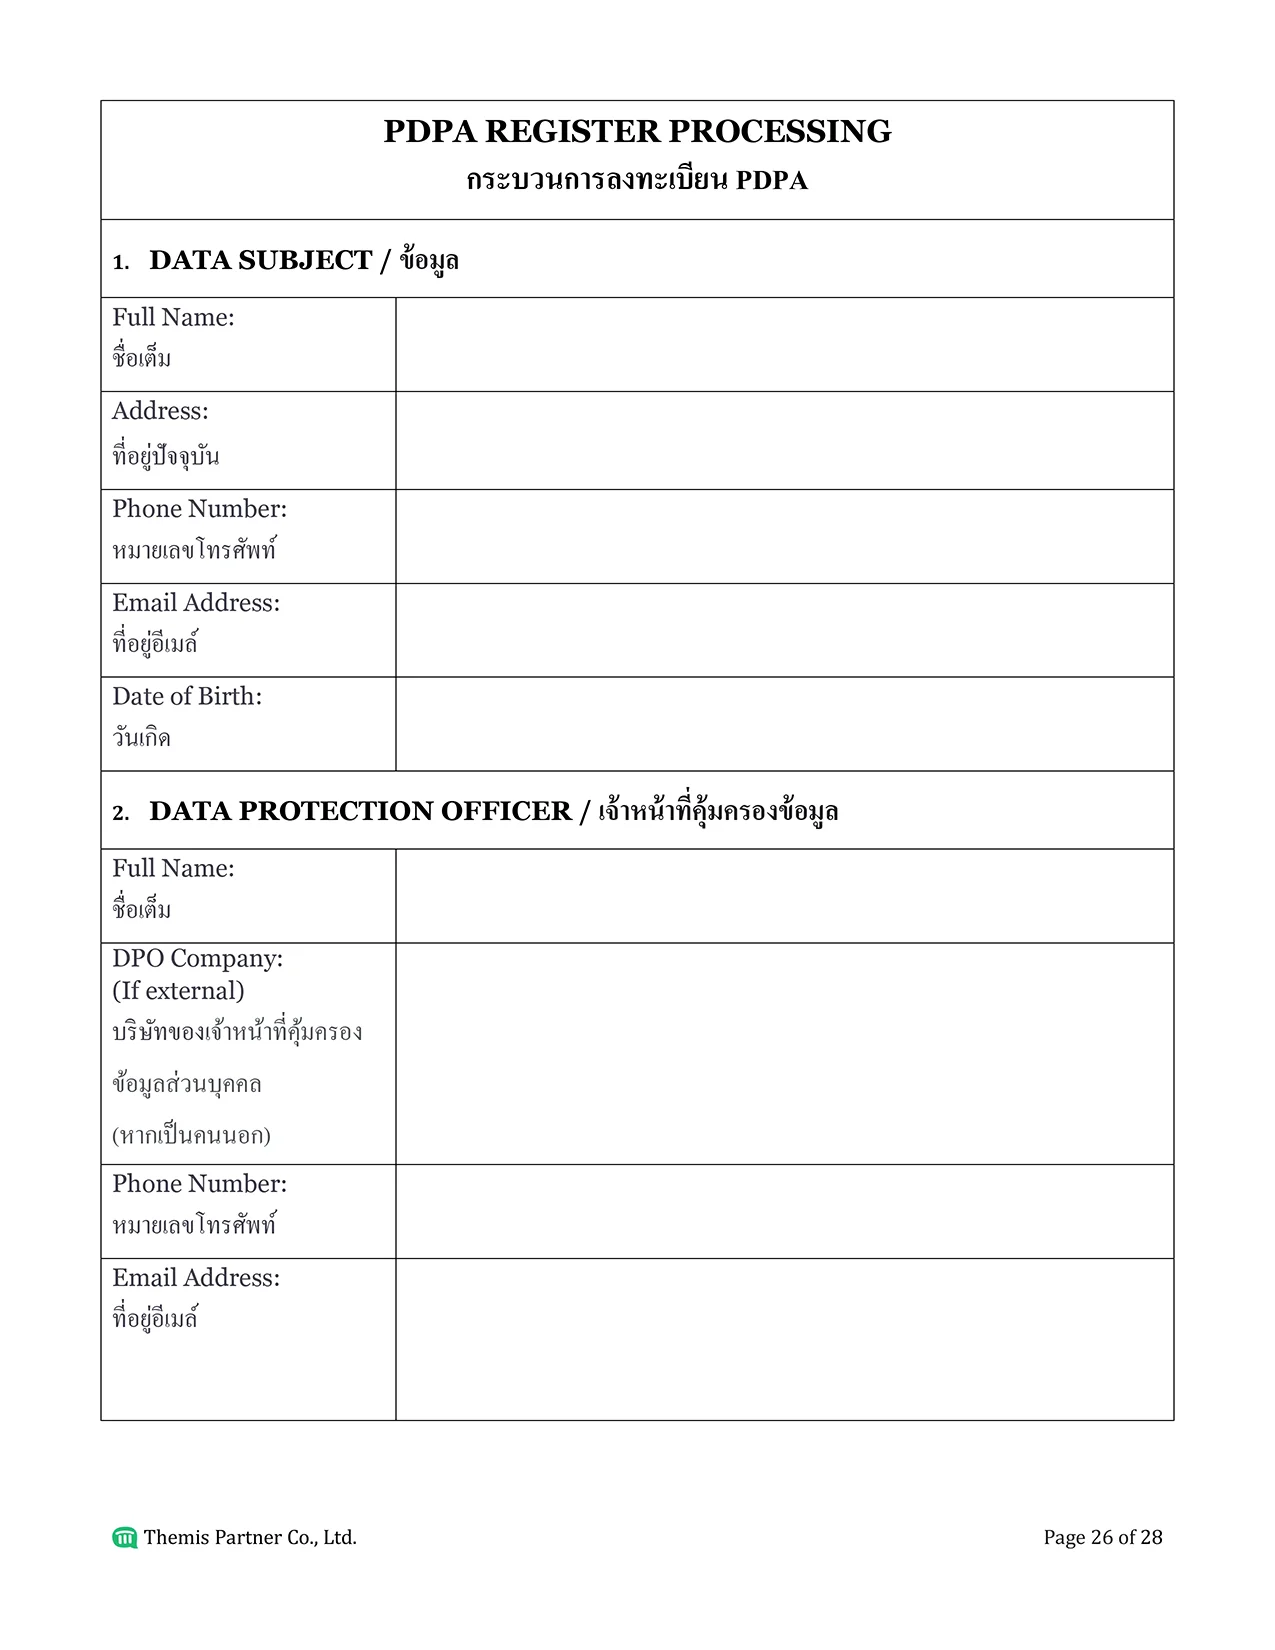 PDPA consent form and company policy Thailand 26